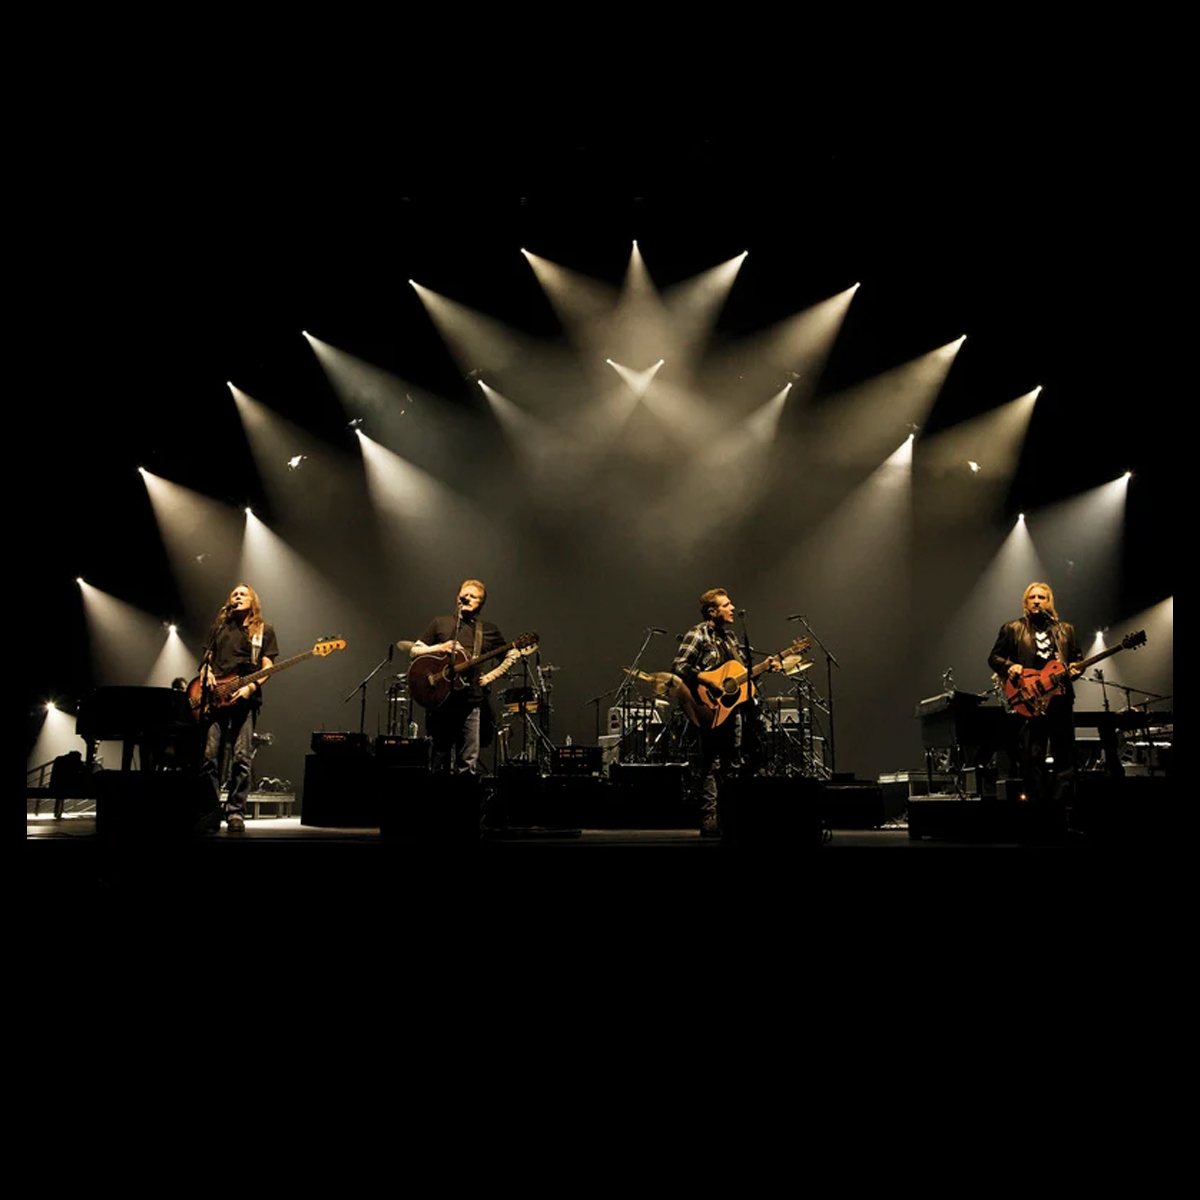 Eagles Live From The Forum MMXVIII – New Release October 16th